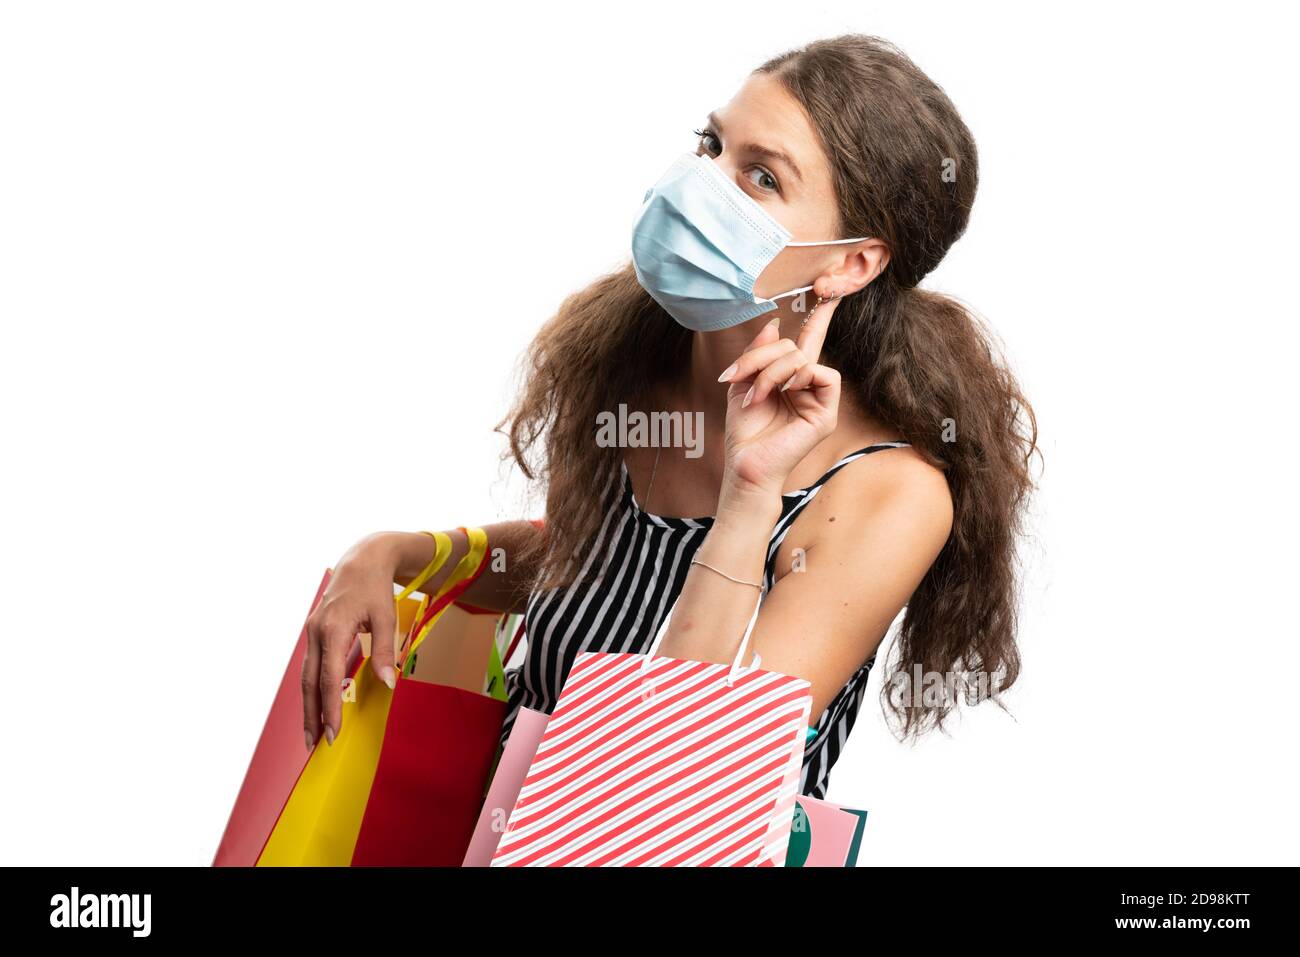 Adult woman model making listening gesture touching ear holding colourful bags wearing mask face covering as covid19 pandemic shopping or consumerism Stock Photo